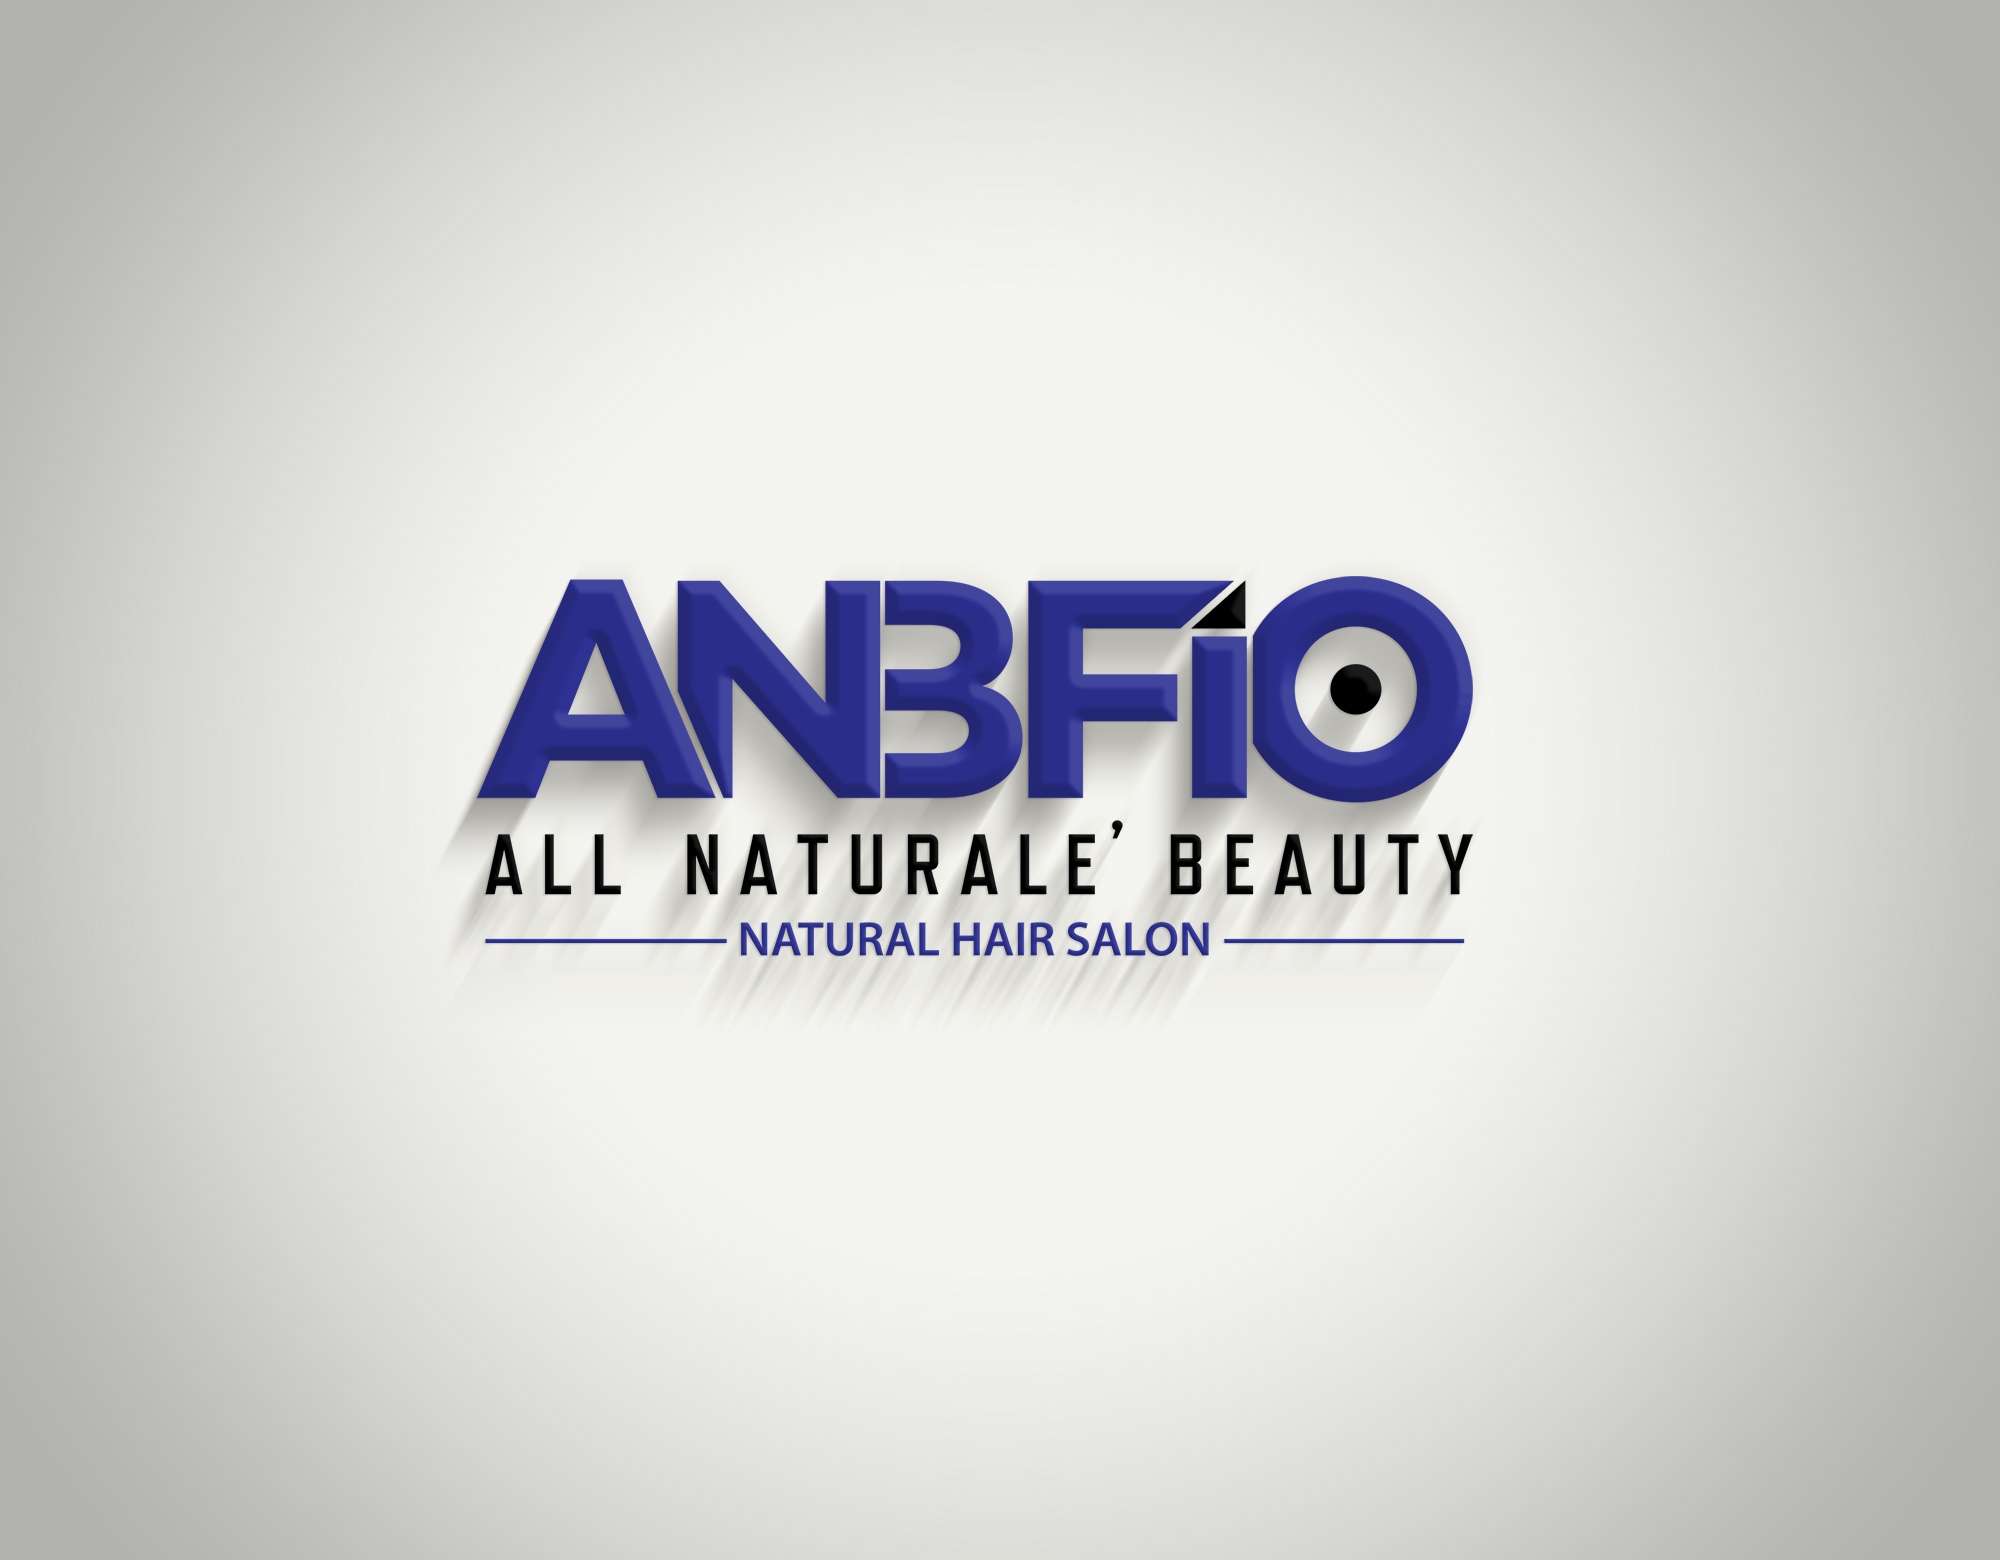 All Naturale Beauty From Inside Out ANBFIO LLC 4815 Butterfield Rd, Hillside Illinois 60162